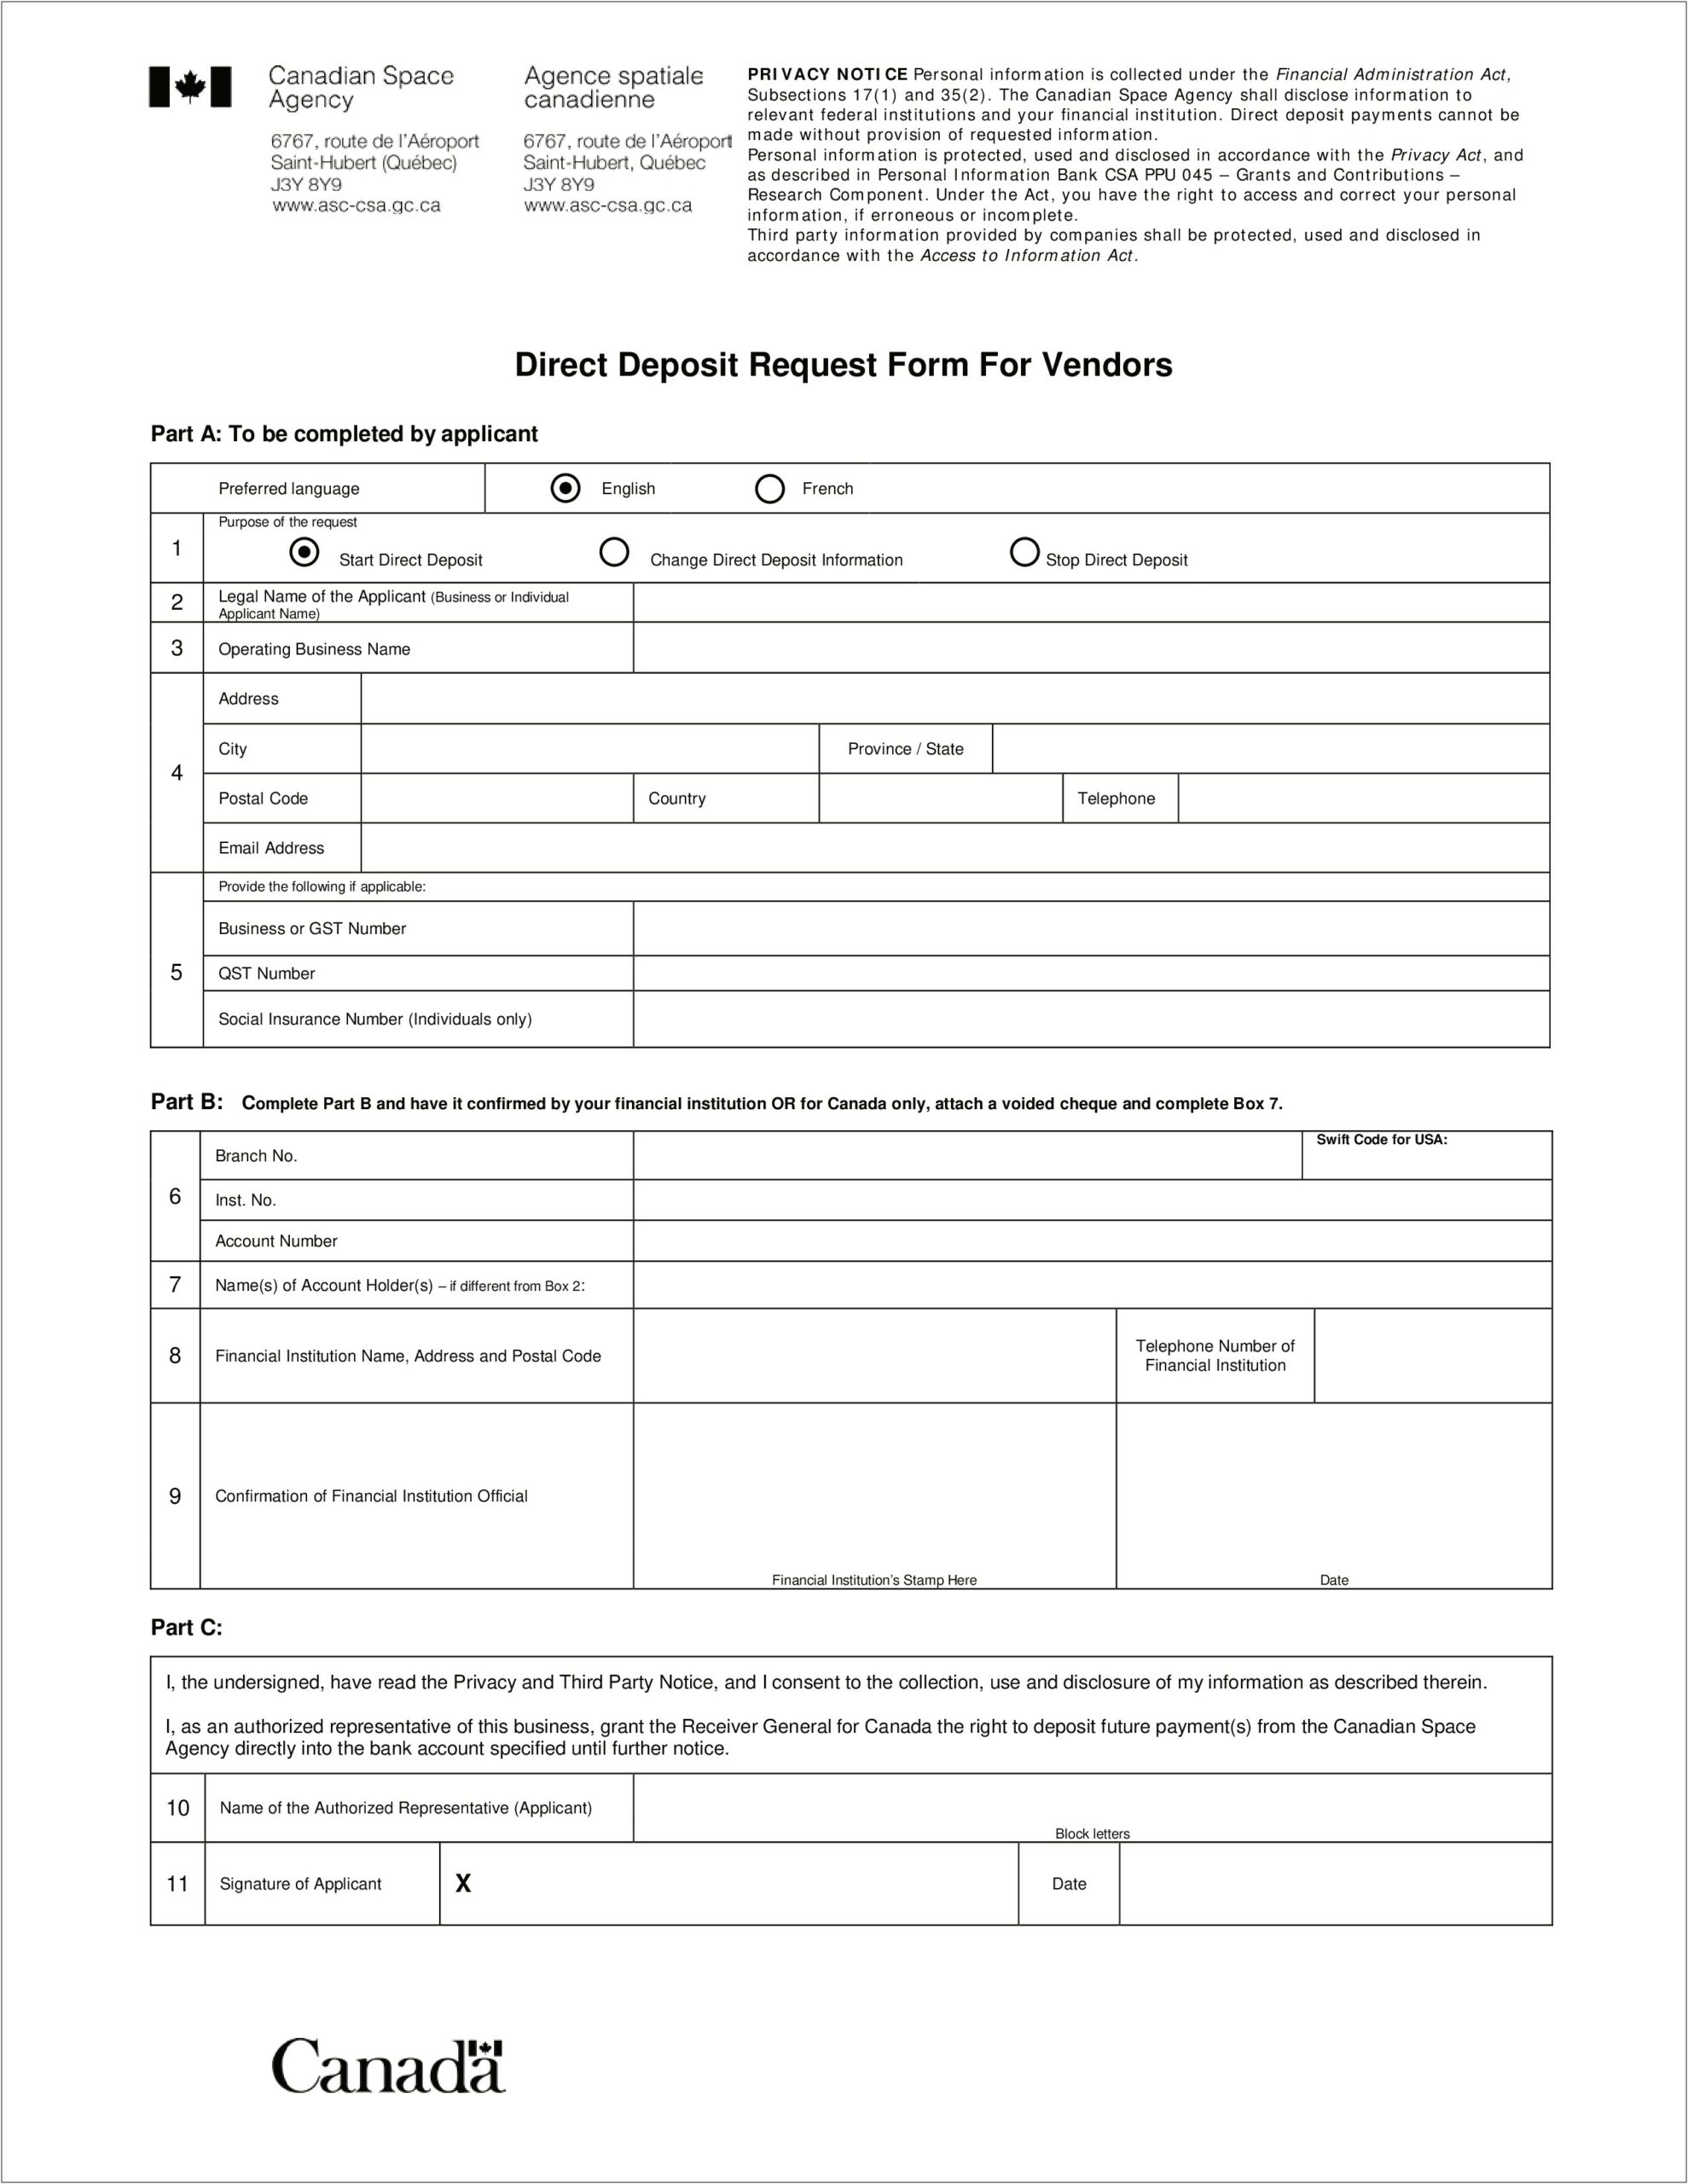 Direct Deposit Authorization Form Free Template